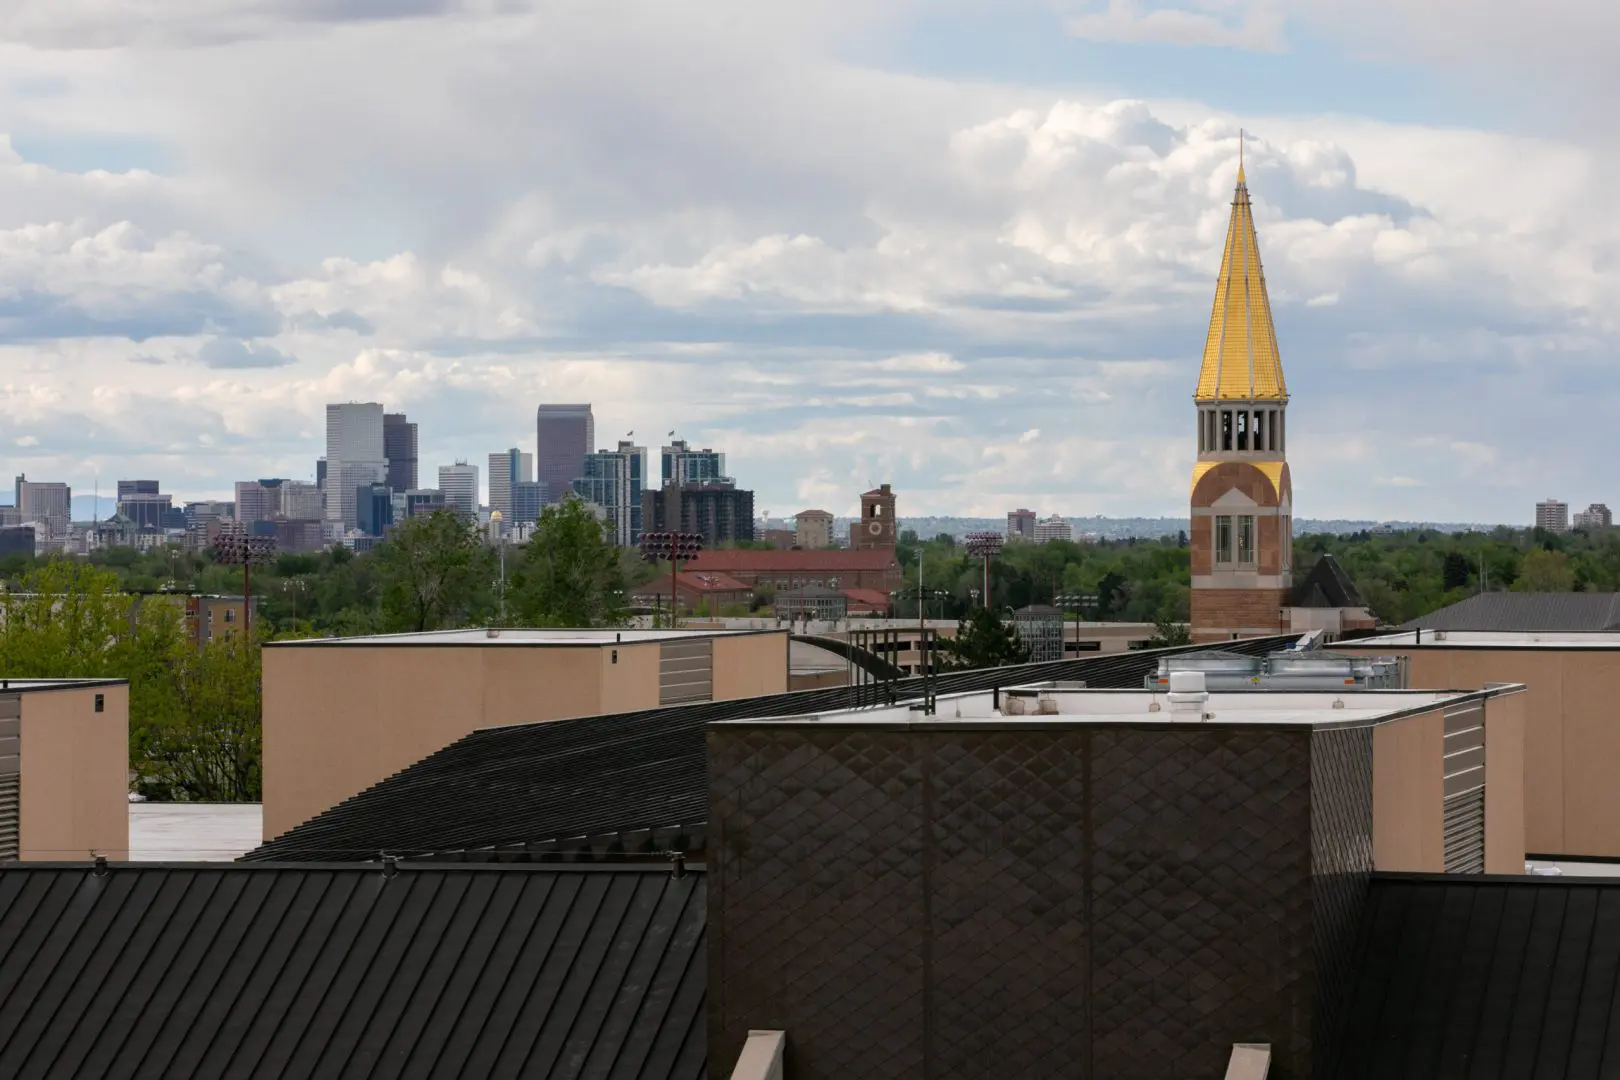 A skyline view of the university of denver campus with a gold spire